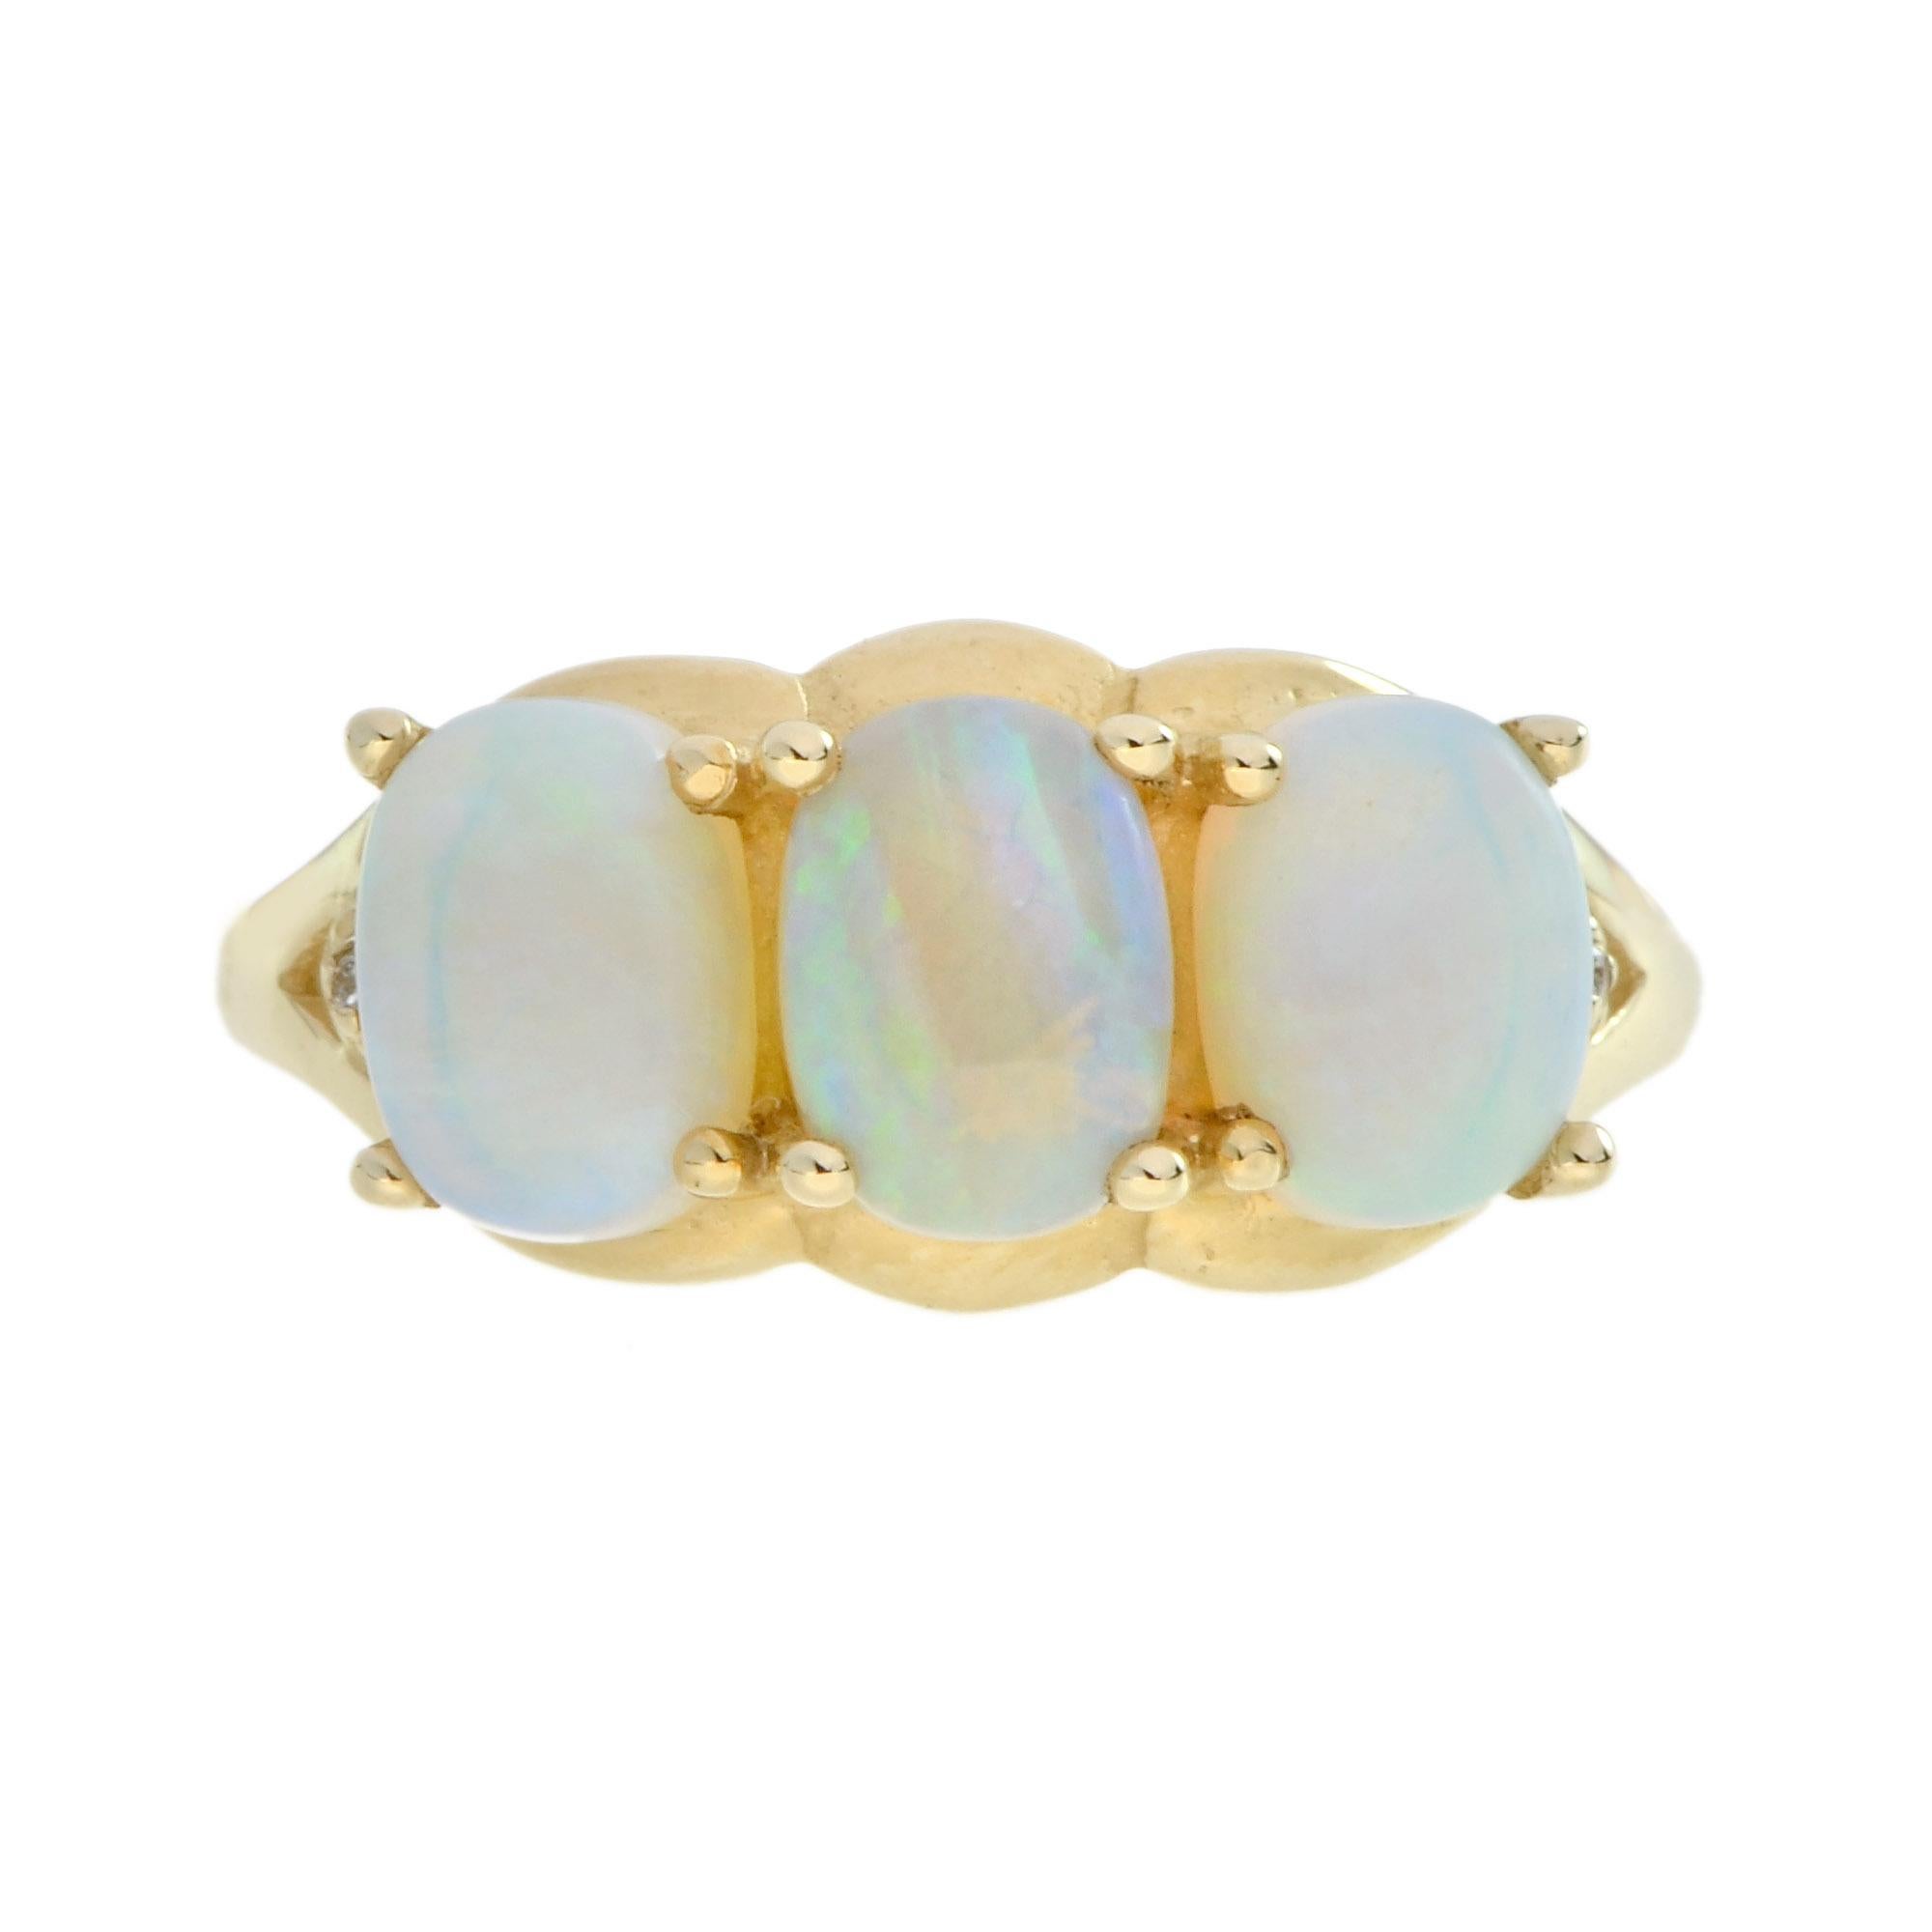 An Art Deco style filigree three stone ring with 7x5 mm natural opals and 1 mm. diamond each side. Filigree rings are timeless in style and can be enjoyed, cherished and handed down as precious family heirlooms.

Ring Information
Style: